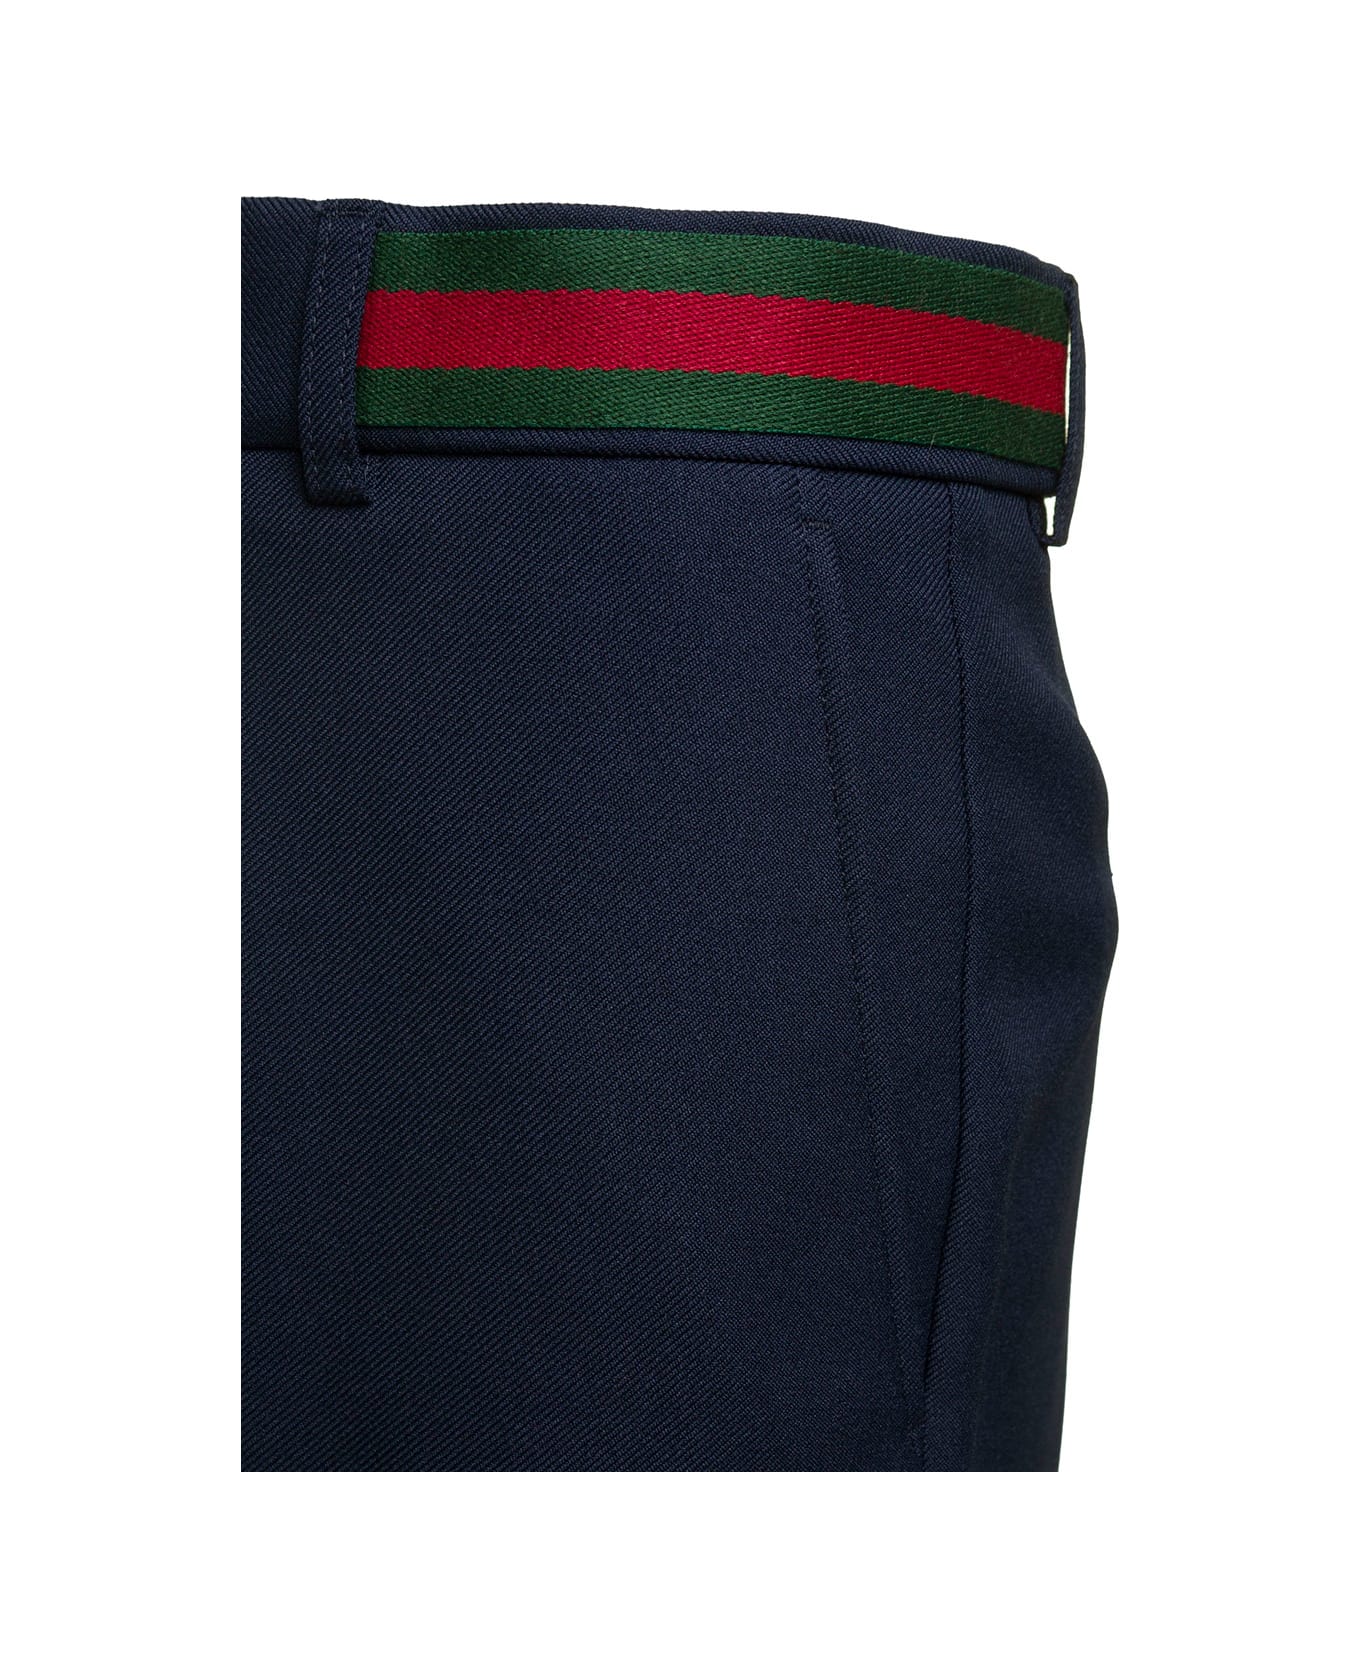 Gucci Pleat-front Trousers - Blue ボトムス